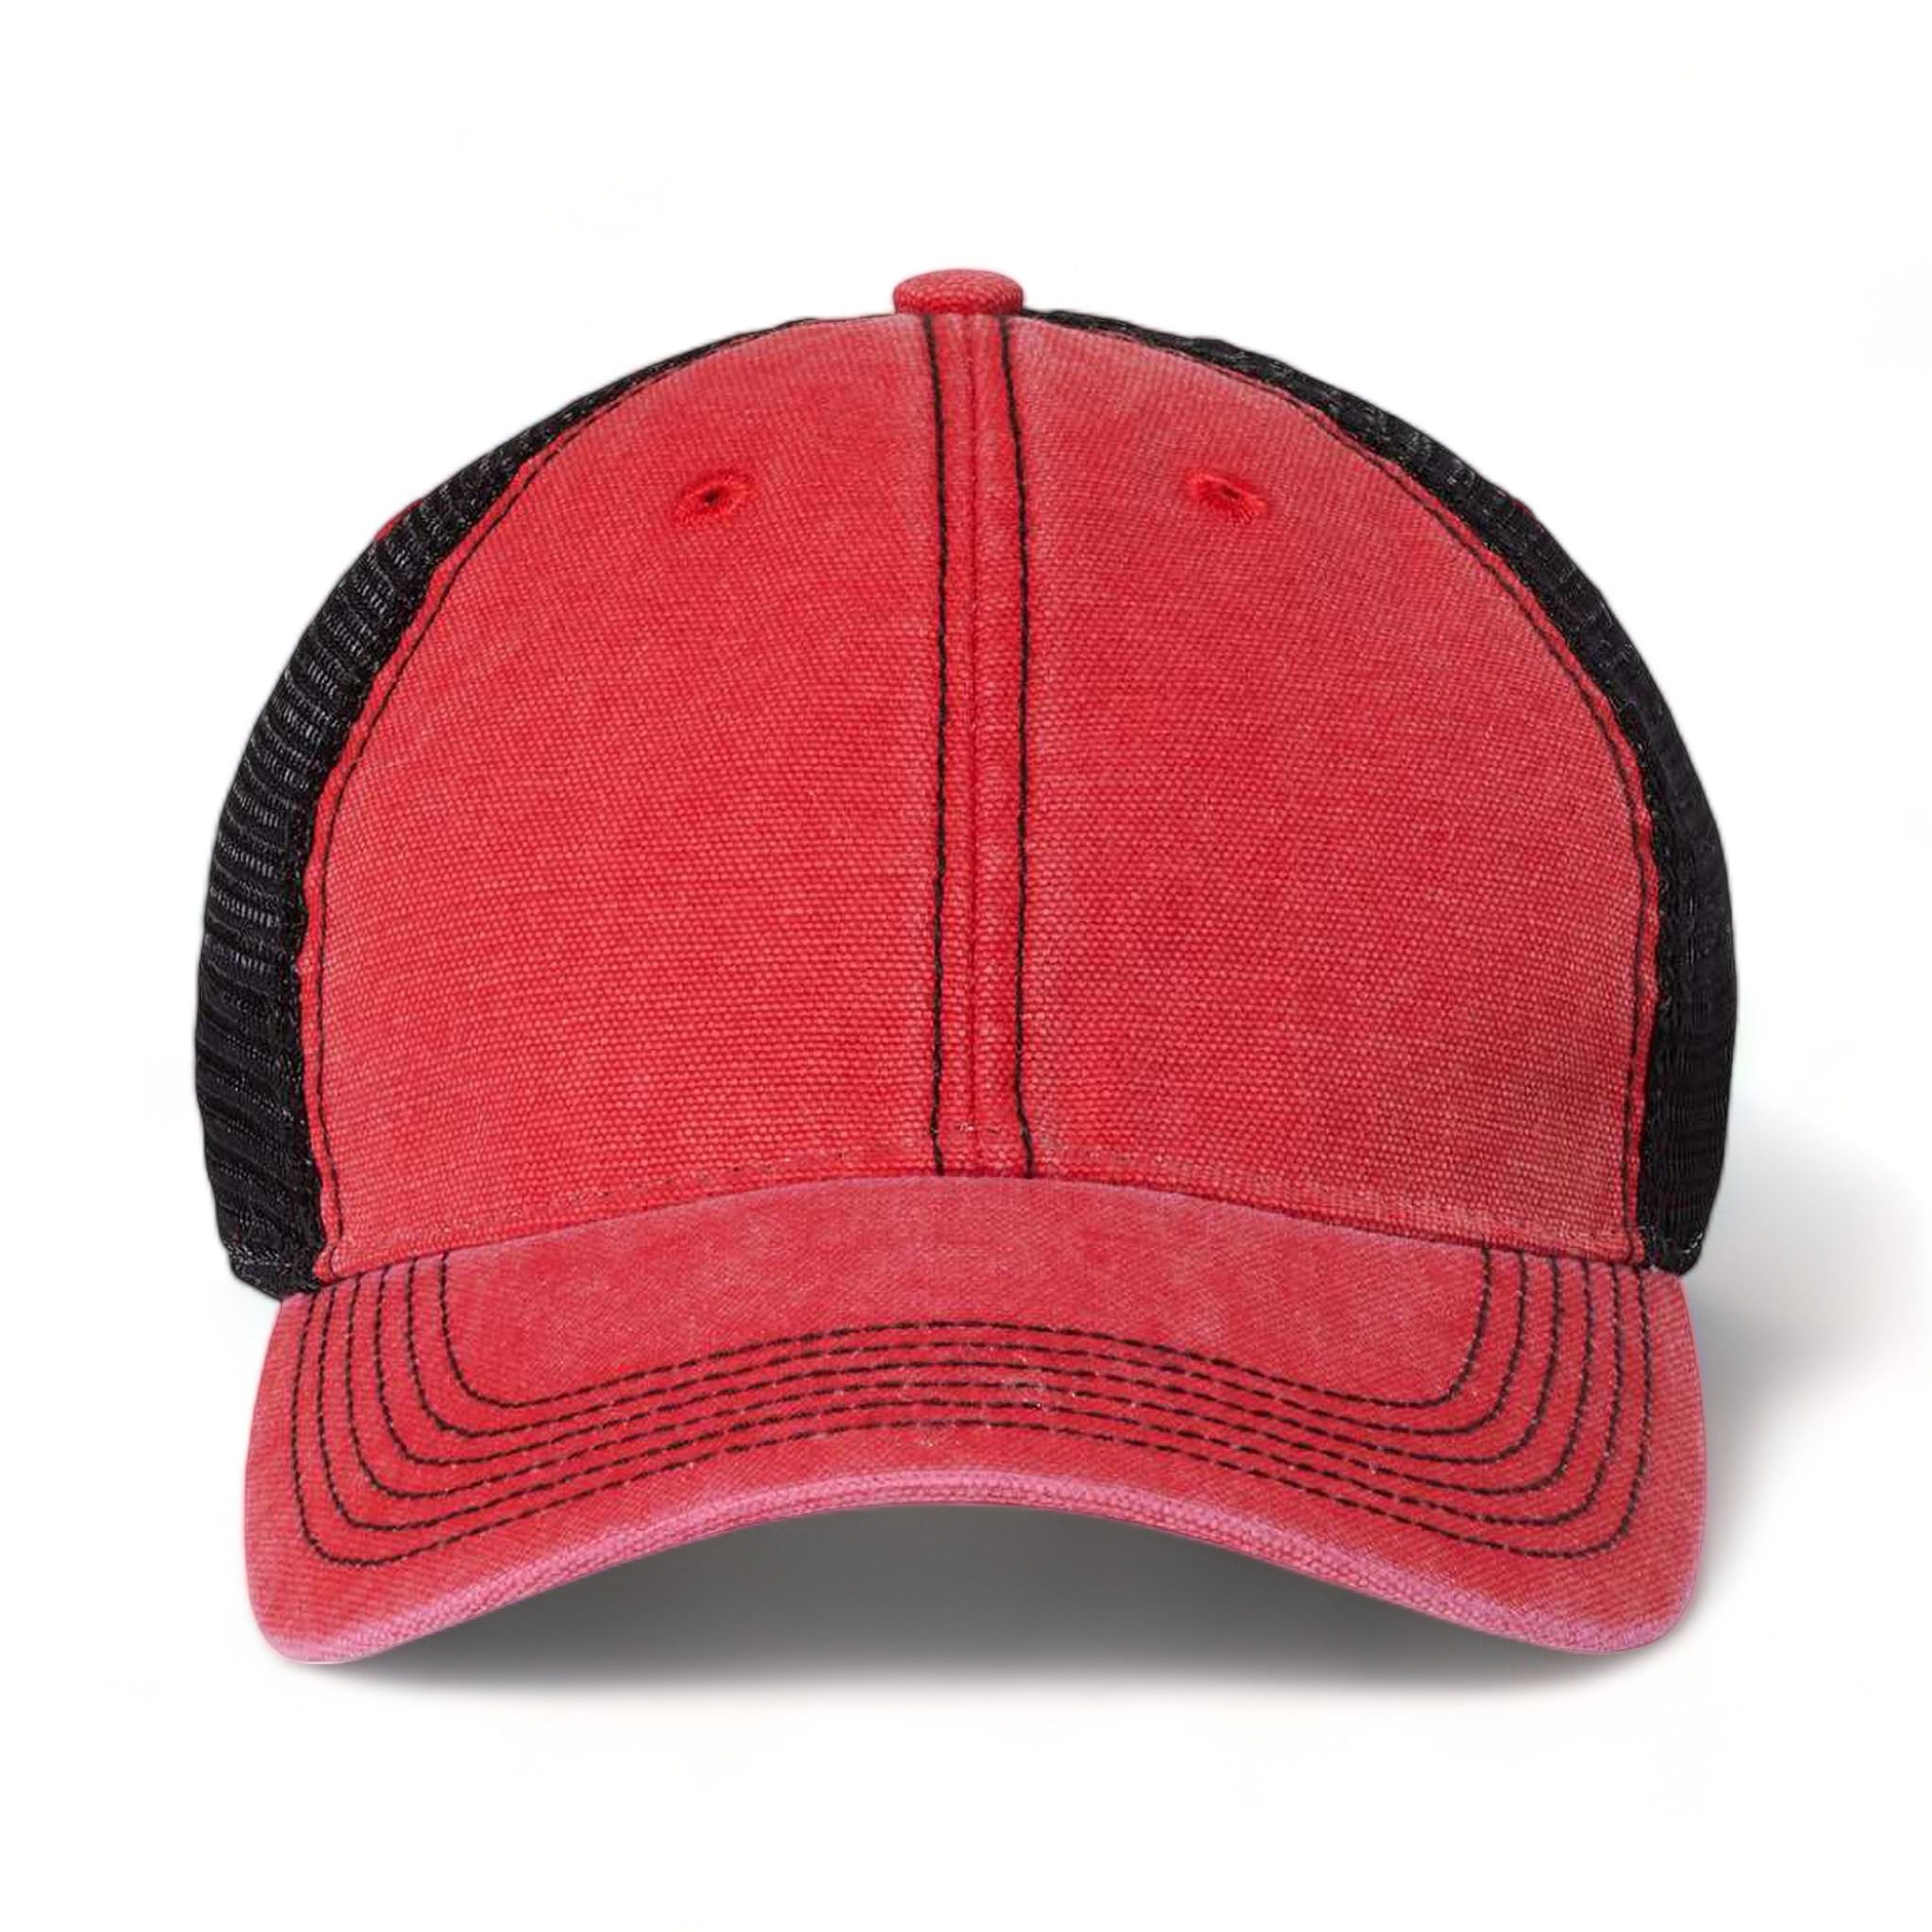 Front view of LEGACY DTA custom hat in scarlet red and black